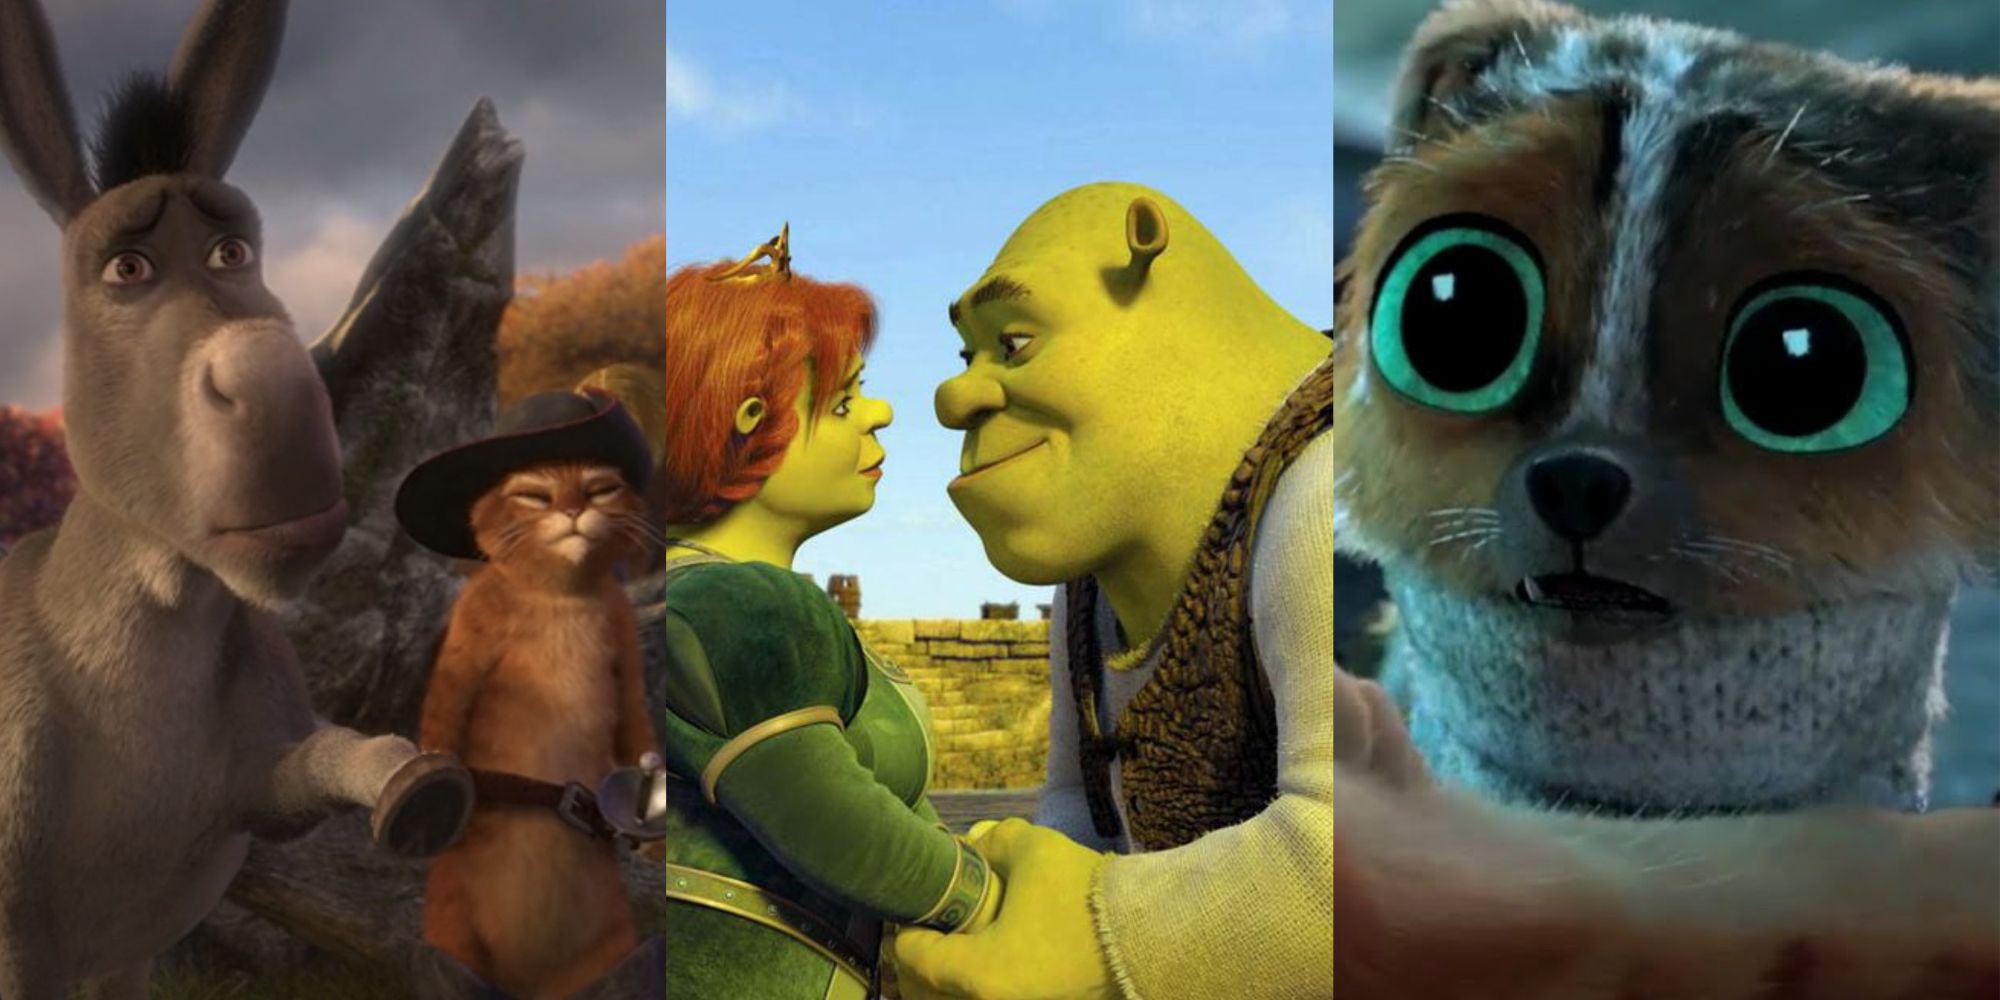 Split image of Donkey raising hoof while Puss looks sad, Shrek and Fiona holding hands and looking at each other, and Perrito looking worried